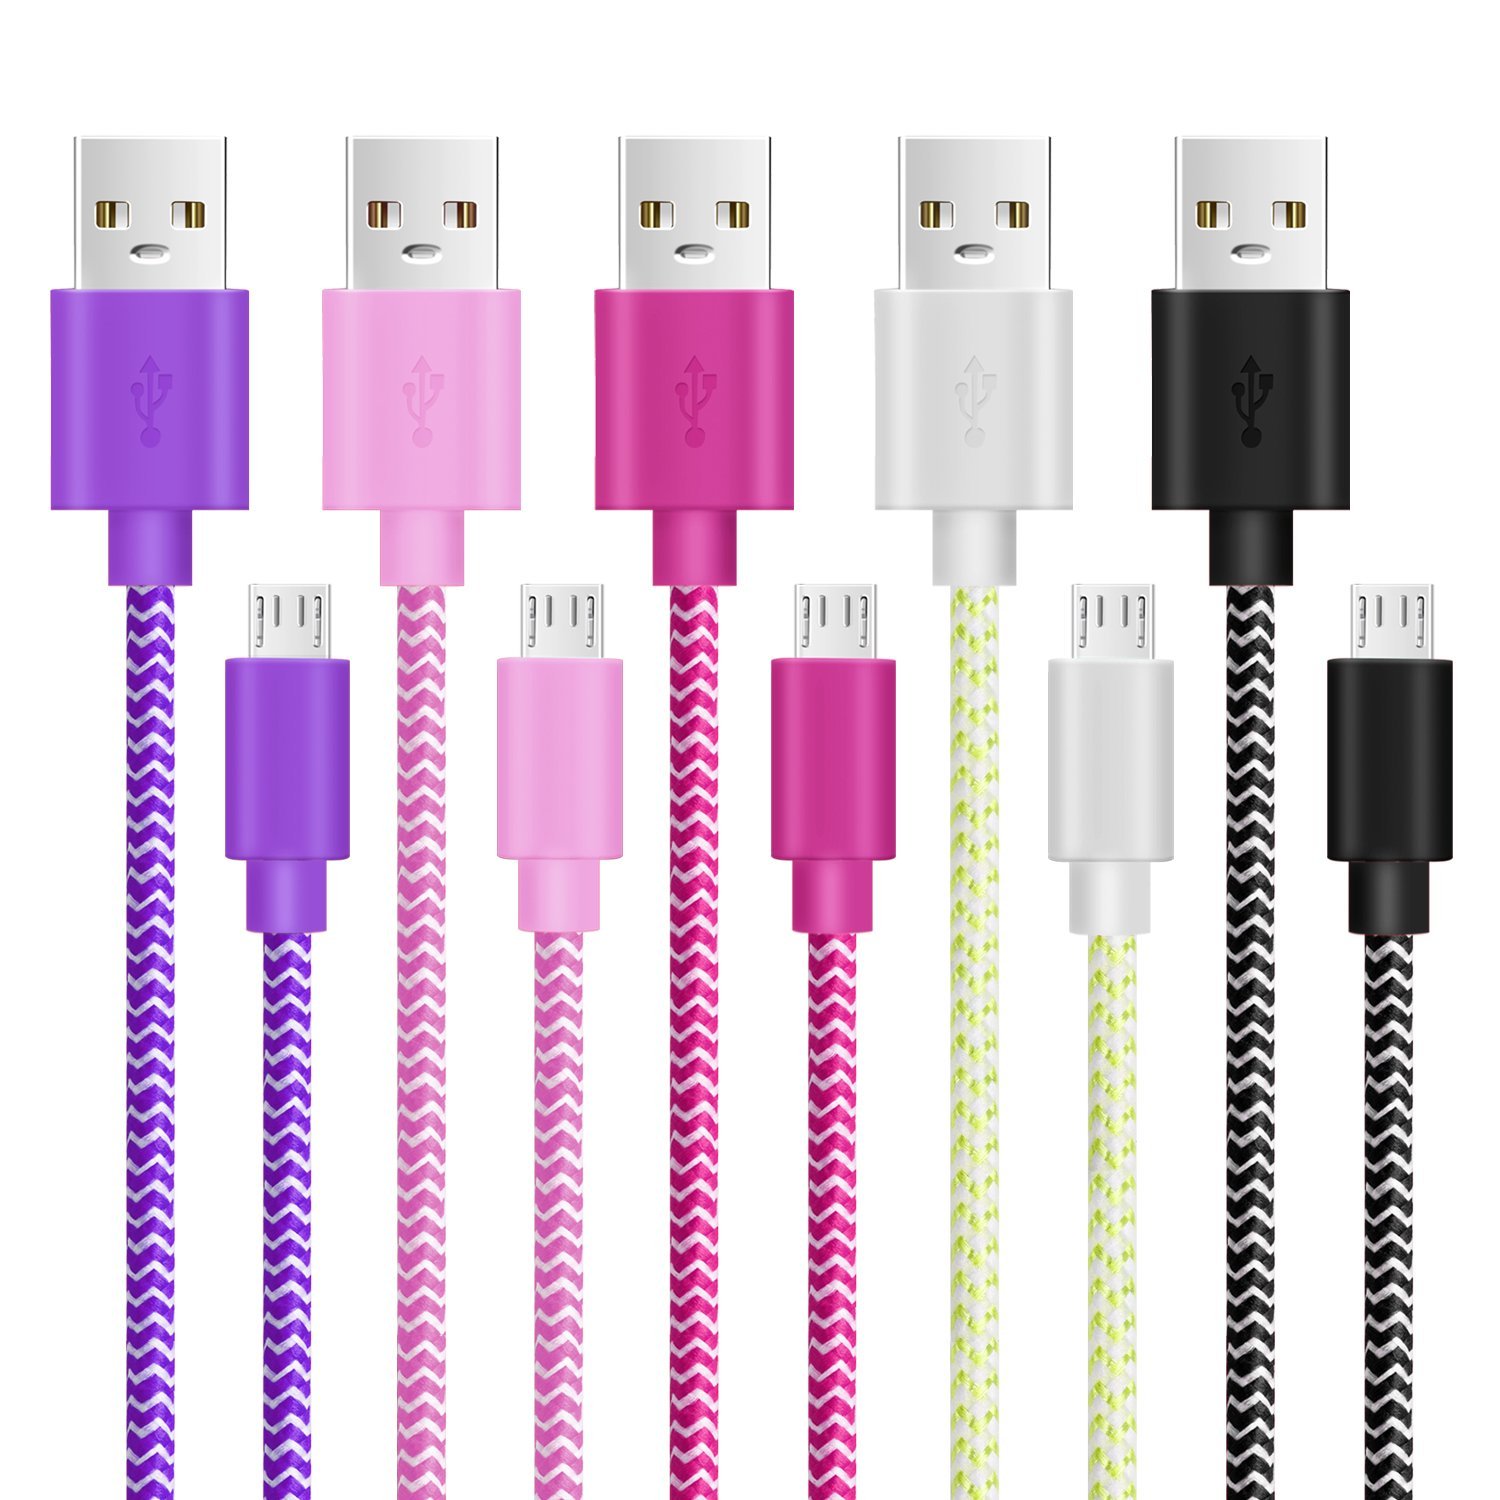 Pofesun Micro USB Multi Color Fast Charging Cord Nylon Braided Android Charger Cable, 6ft (Pack of 5)